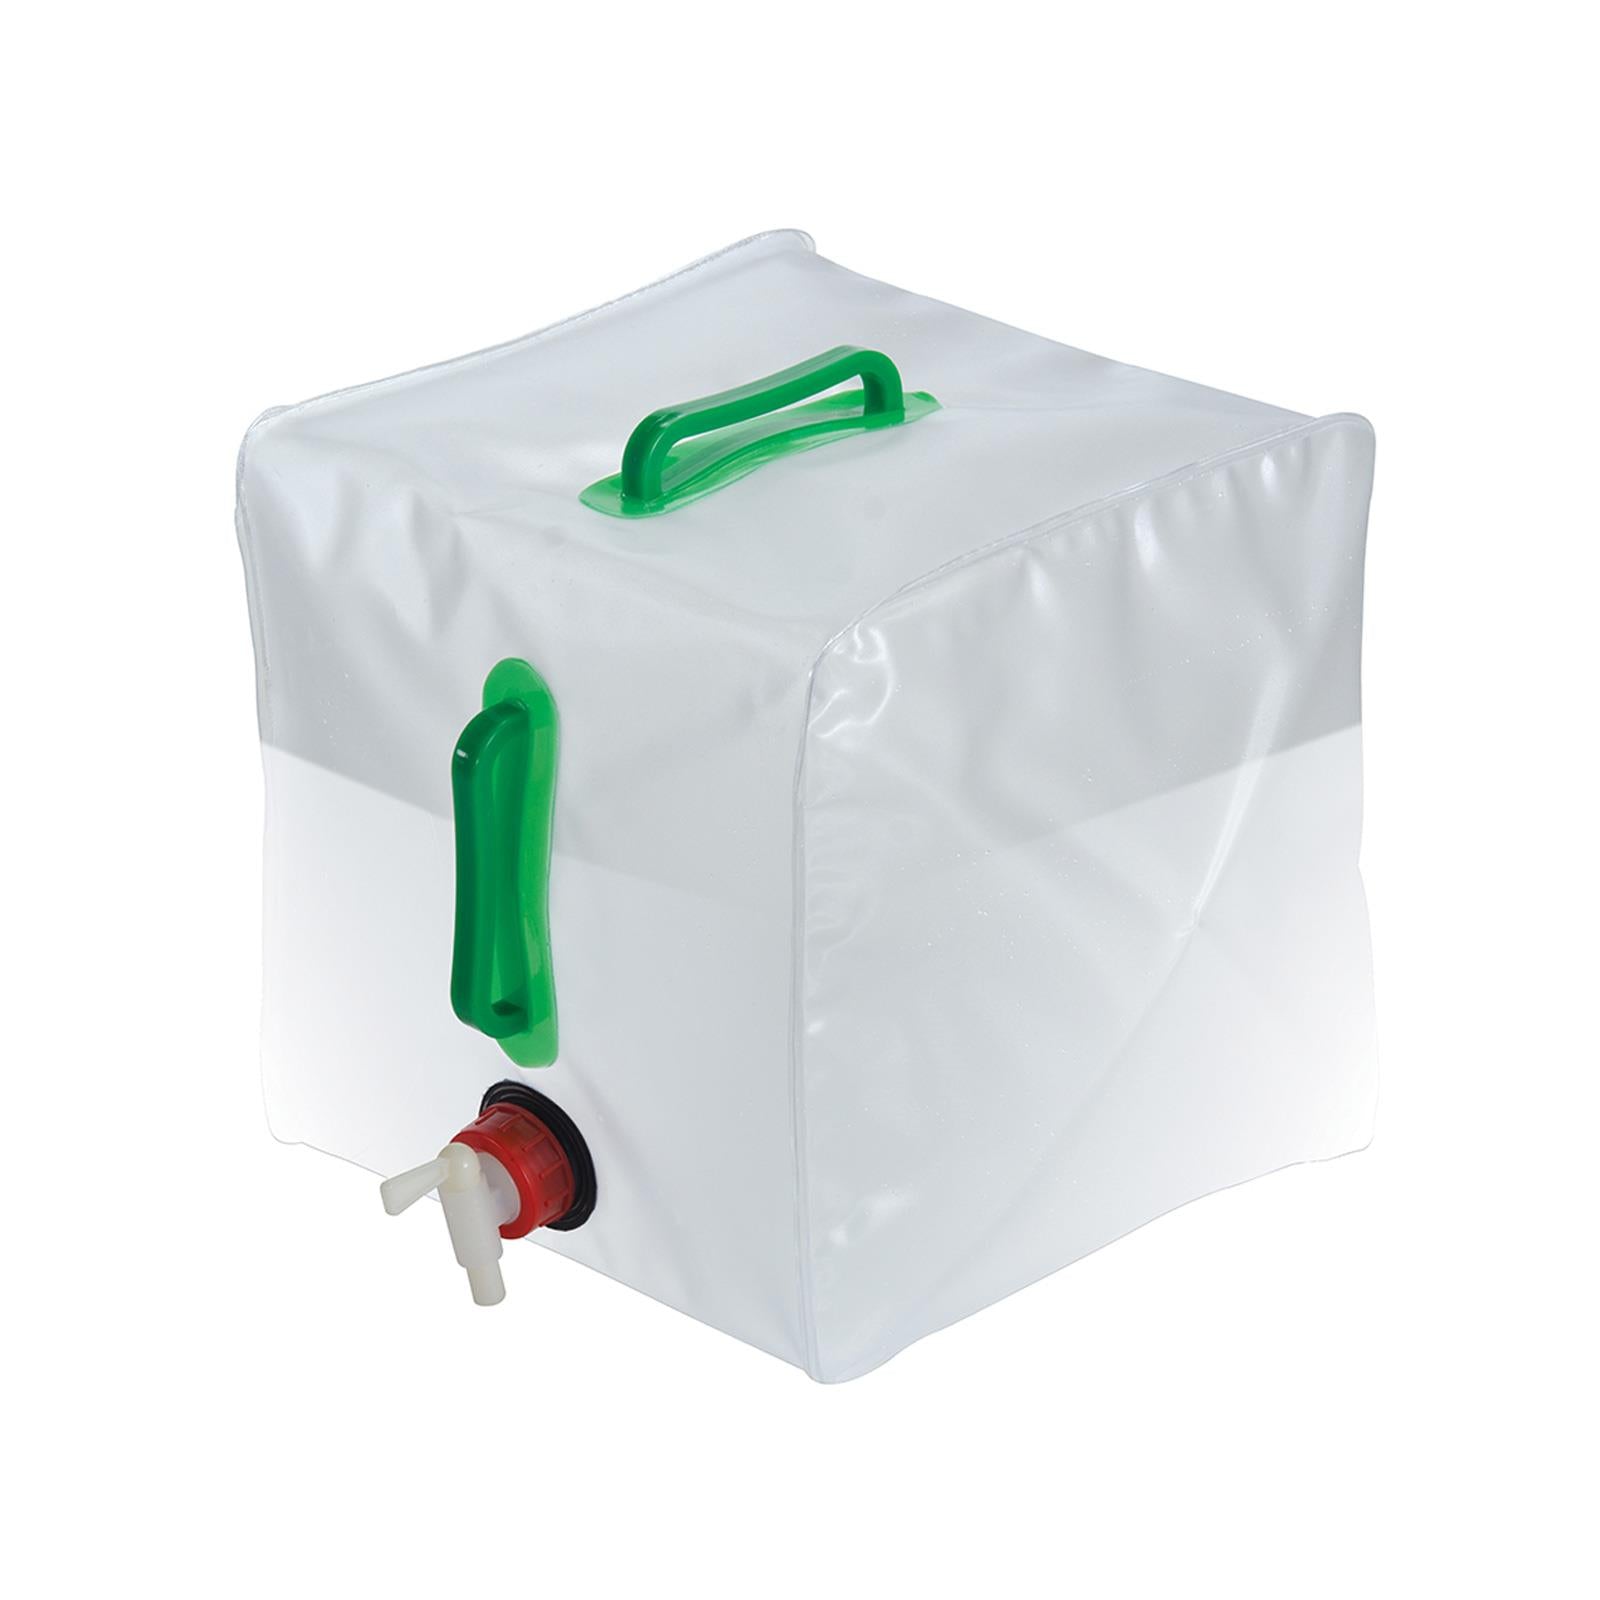 Collapsible Water Container - 20Ltr Easy To Store Sturdy Top And Side Handle